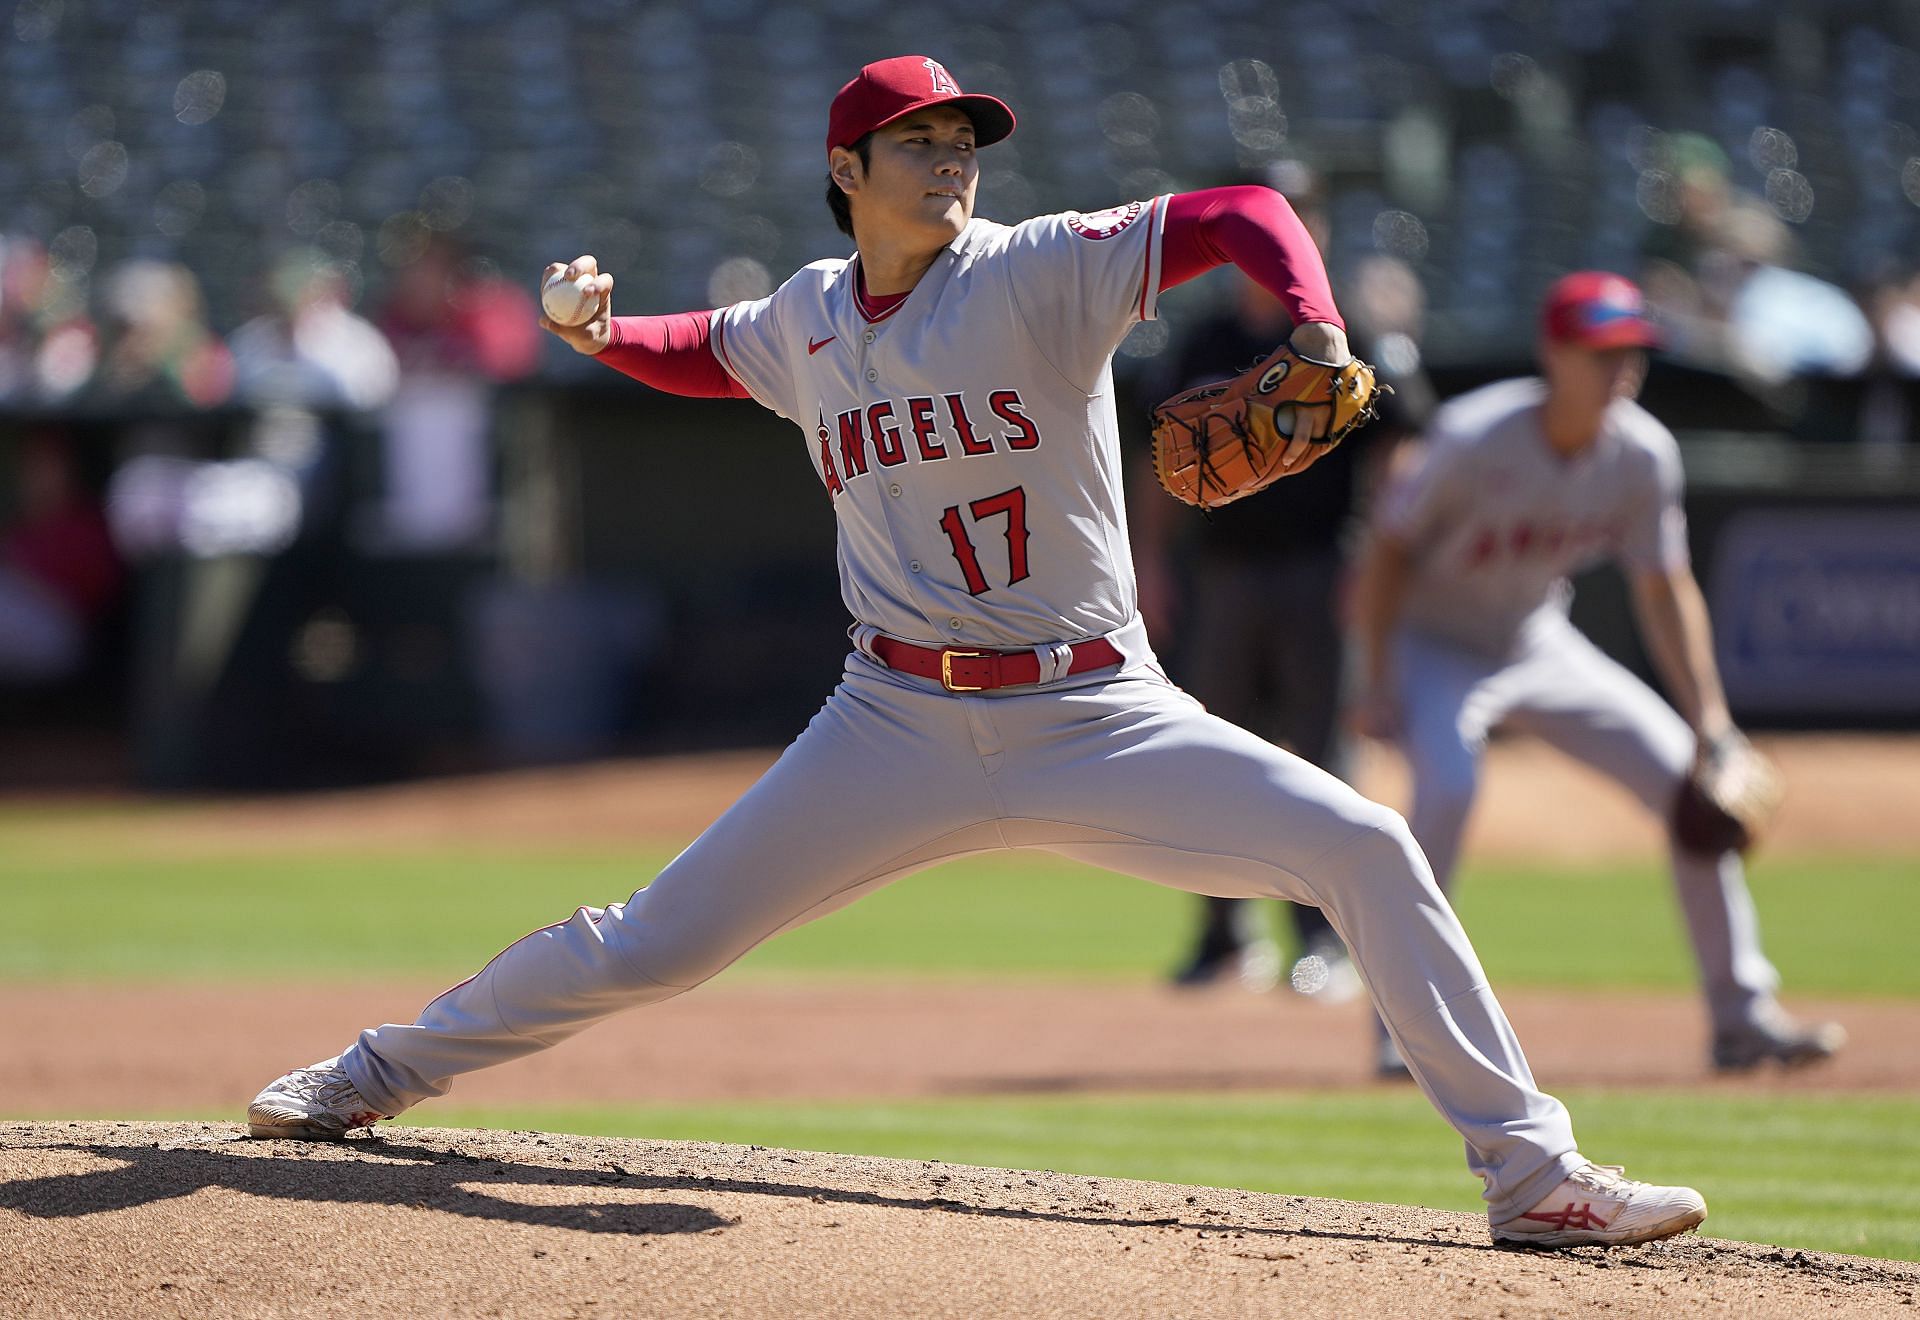 Shohei Ohtani Rumors: Insider Says Padres Have Second-Best Odds to